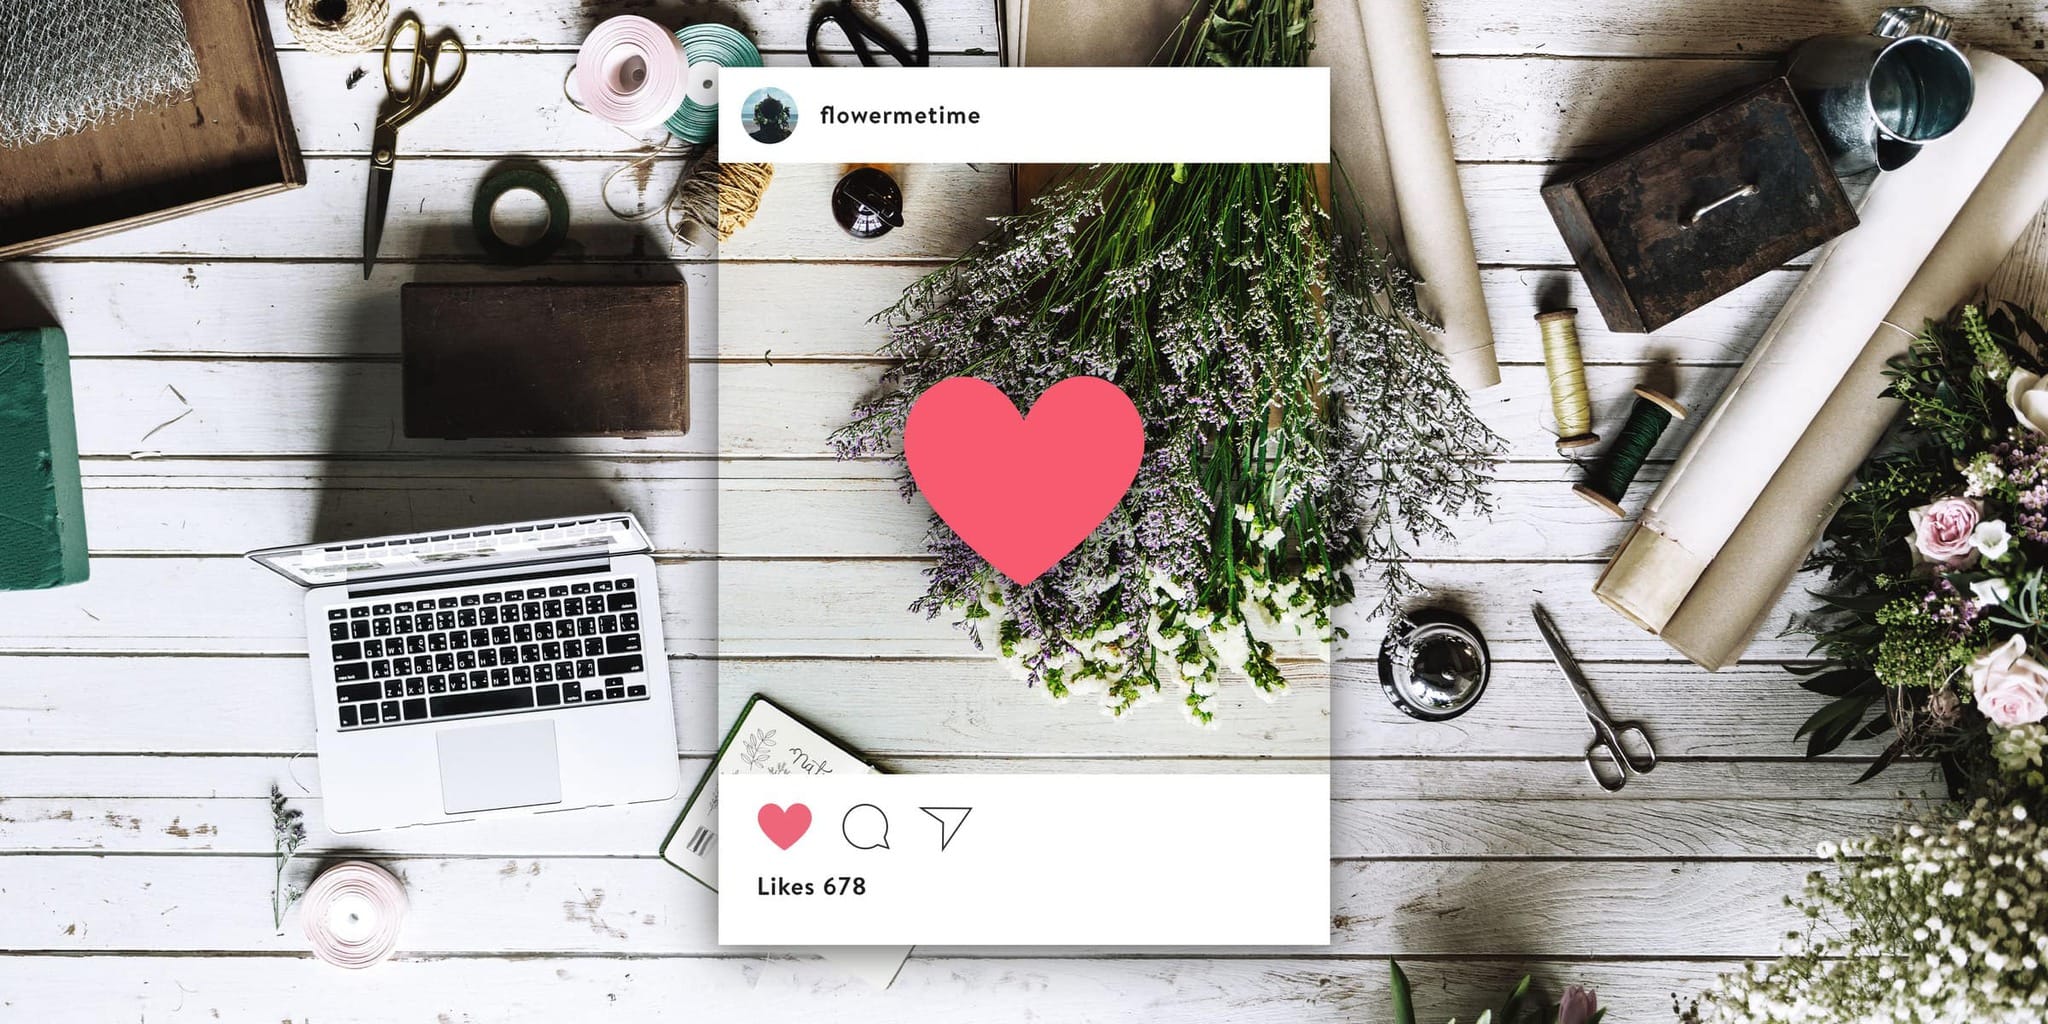 how to use instagram for your business tips trends for 2019 - instagram marketing tips how to market you brand using ig 2019